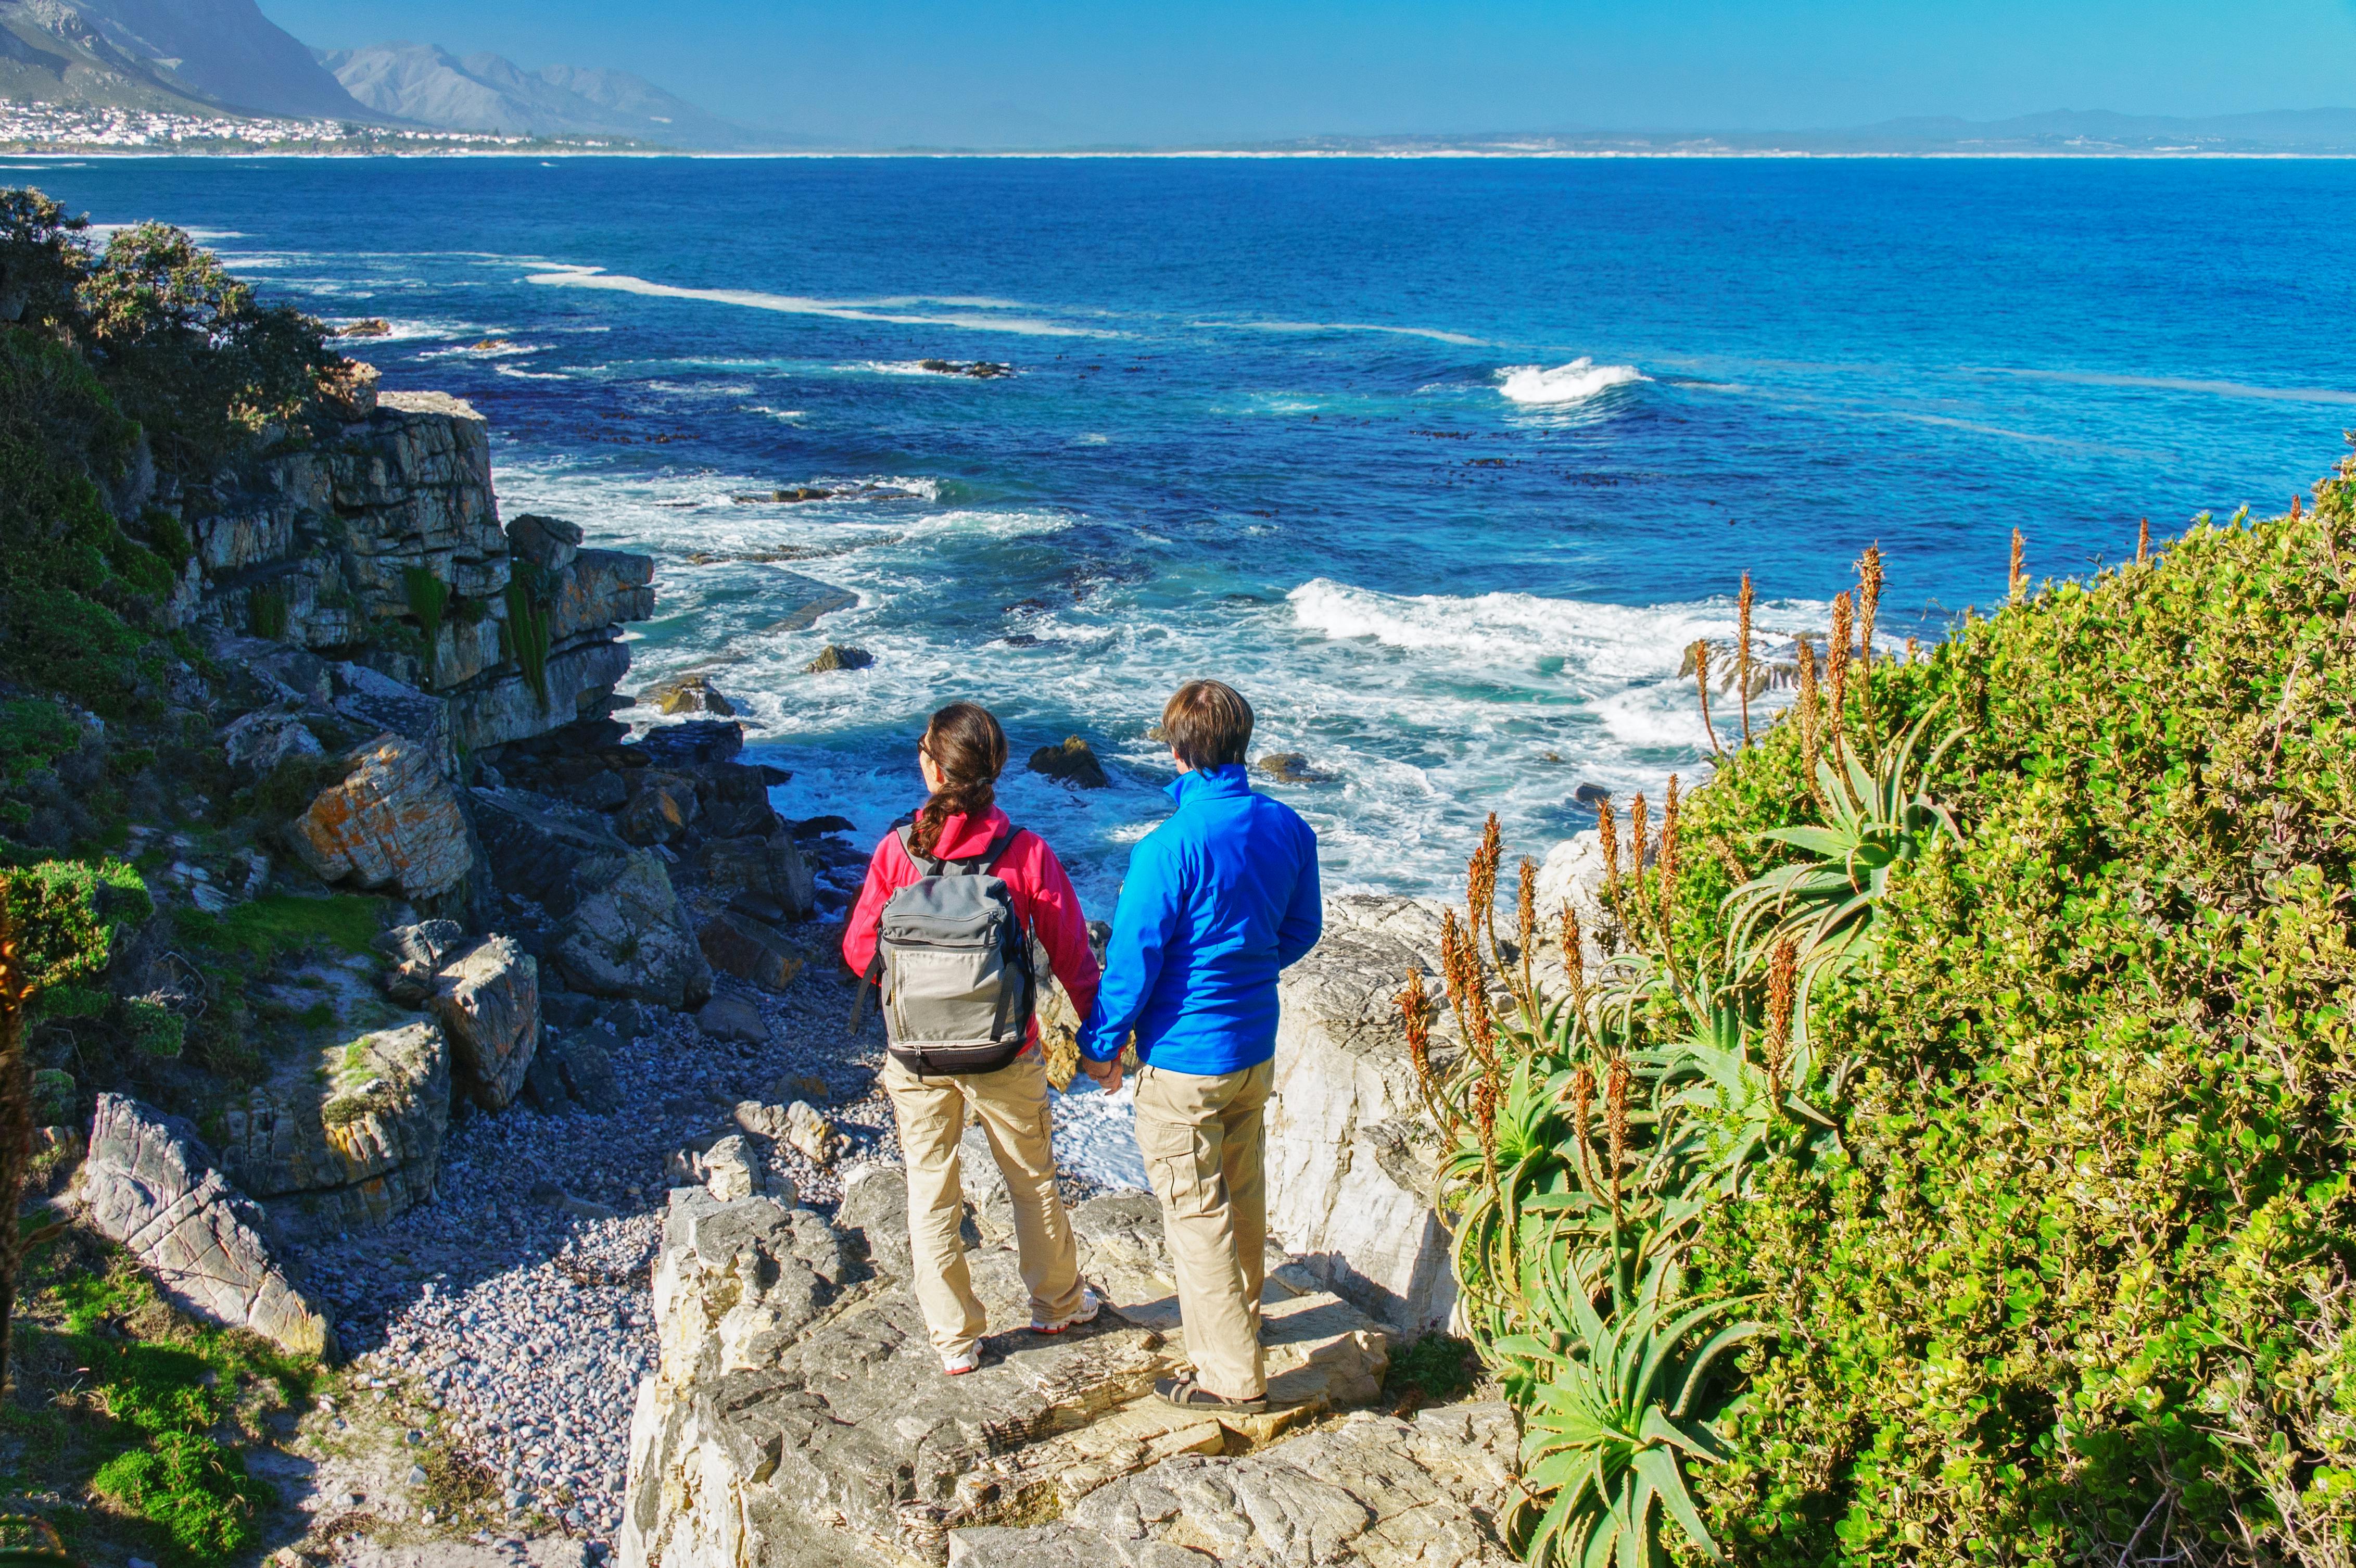 Hermanus full-day tour from Cape Town